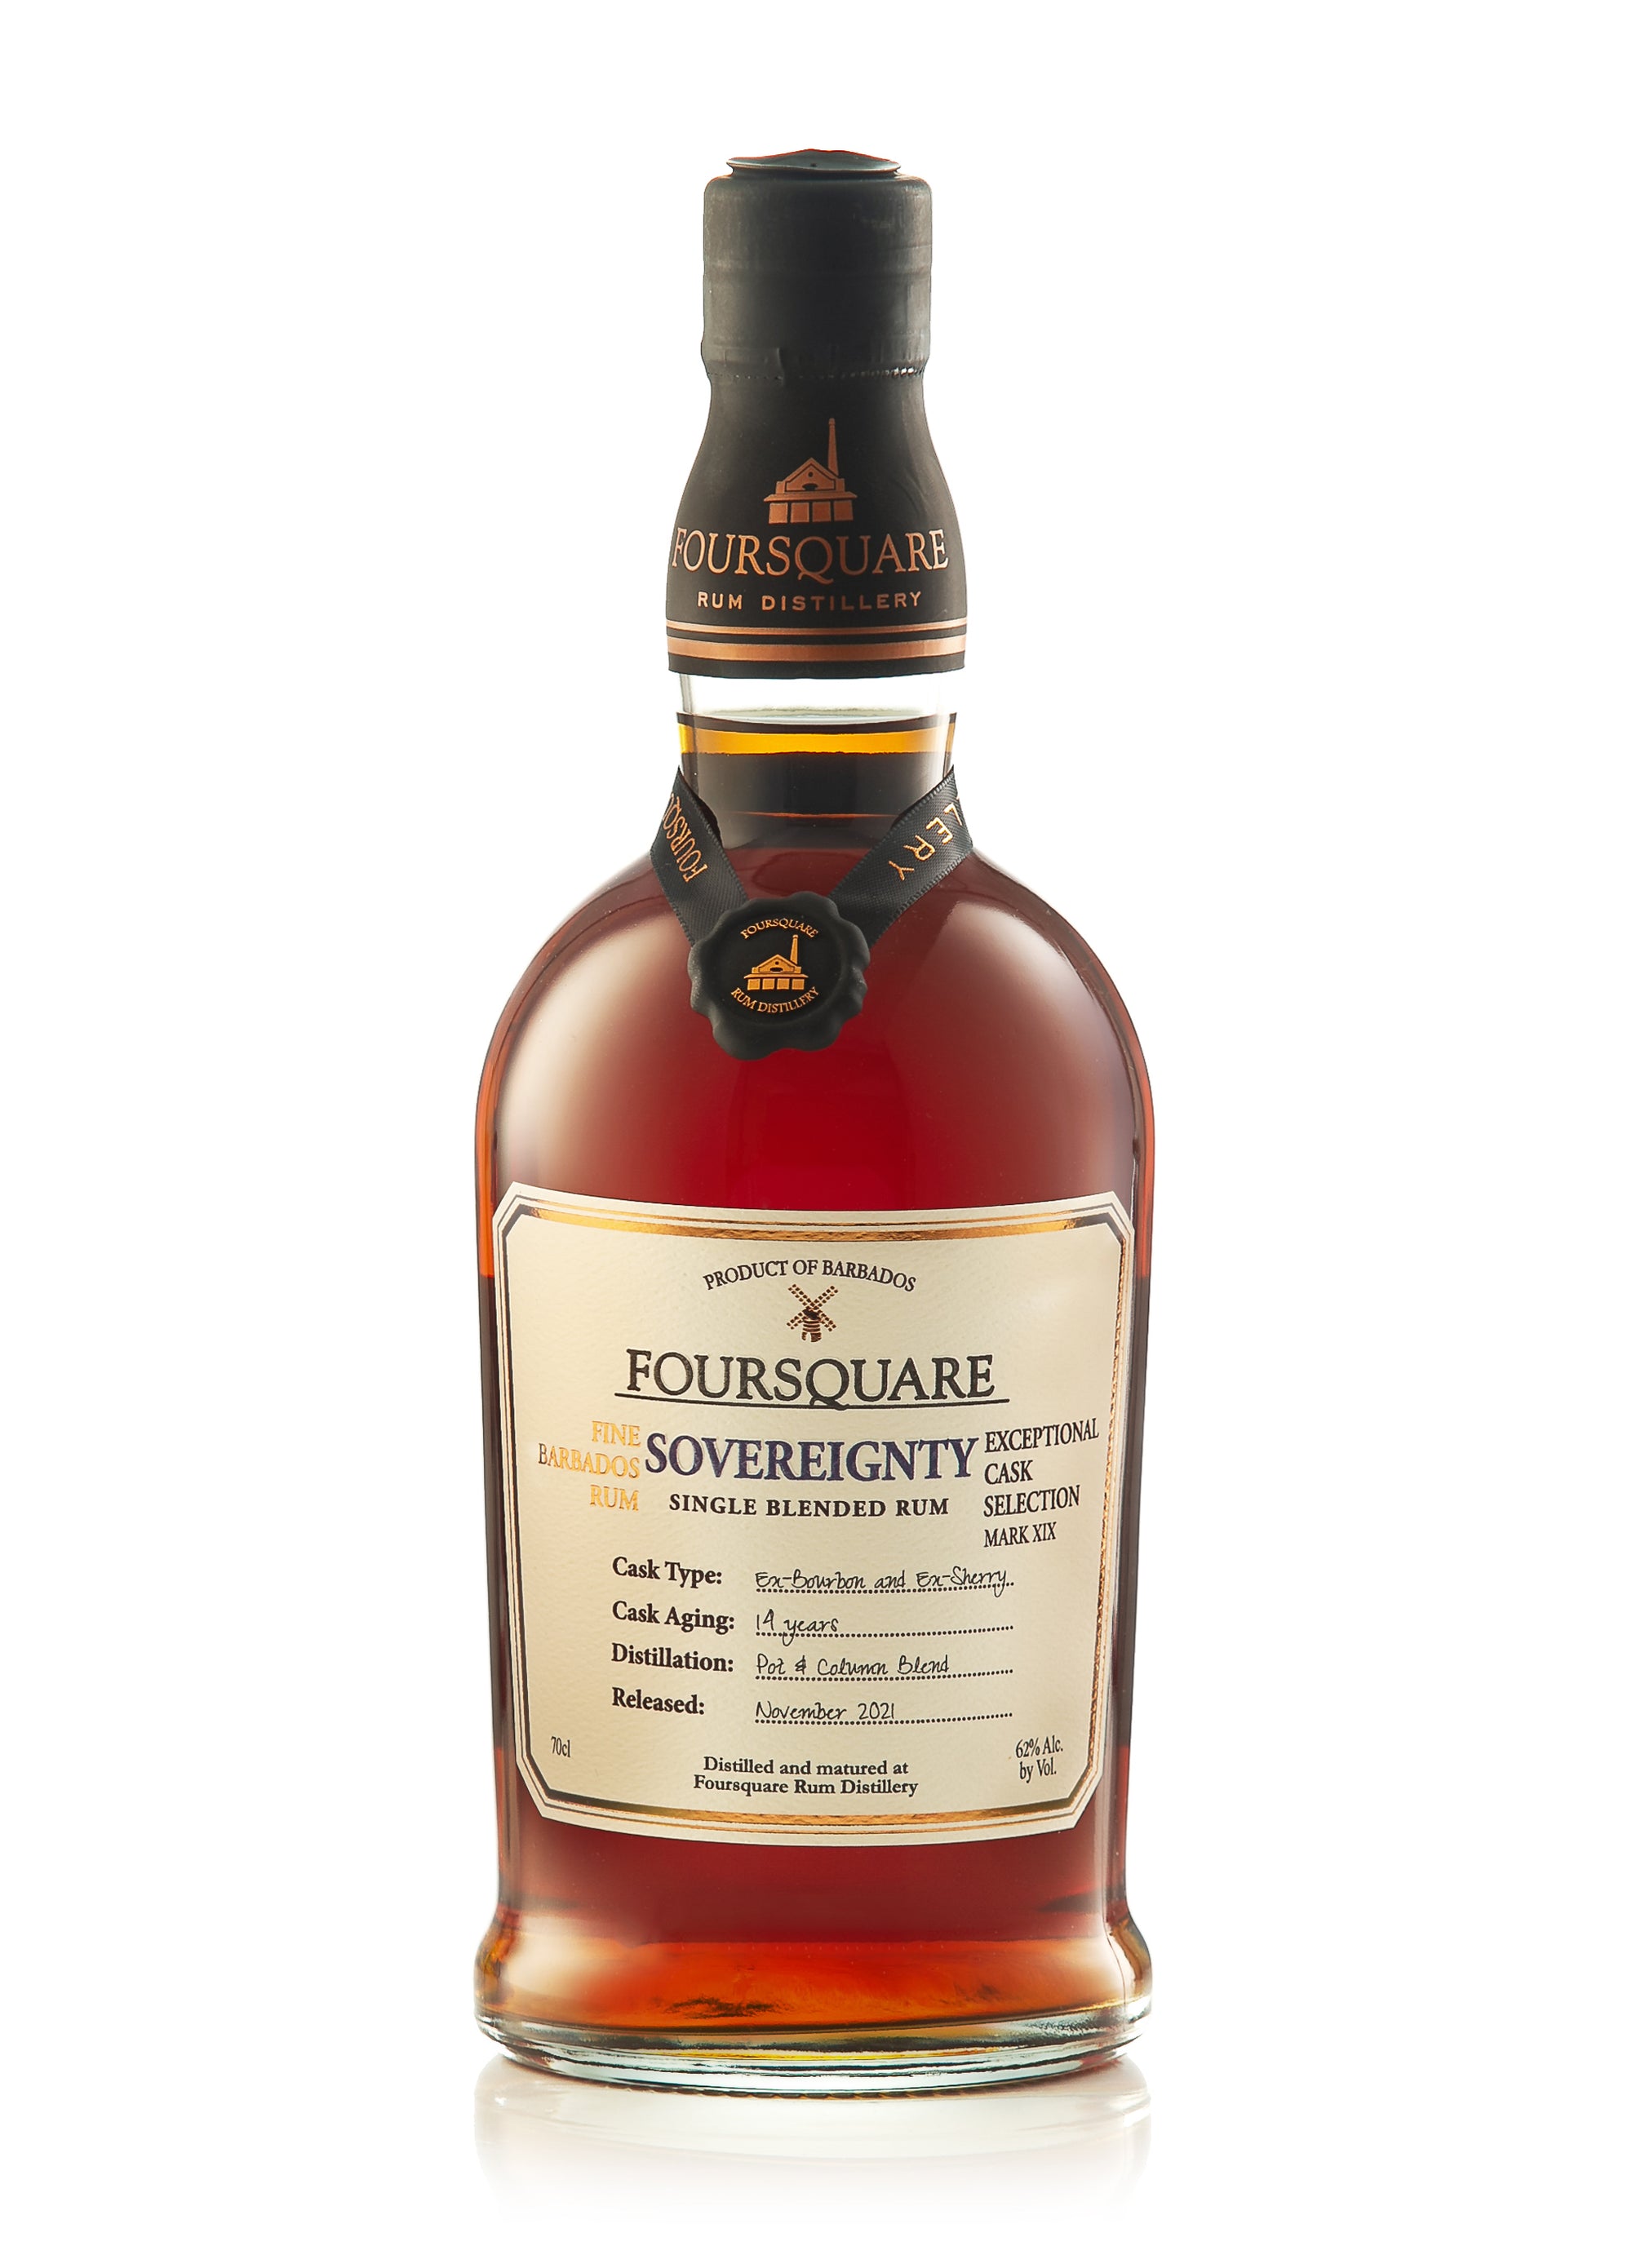 Bottle of Foursquare Sovereignty, Single Blended Rum, Barbados, 62% - The Spirits Room